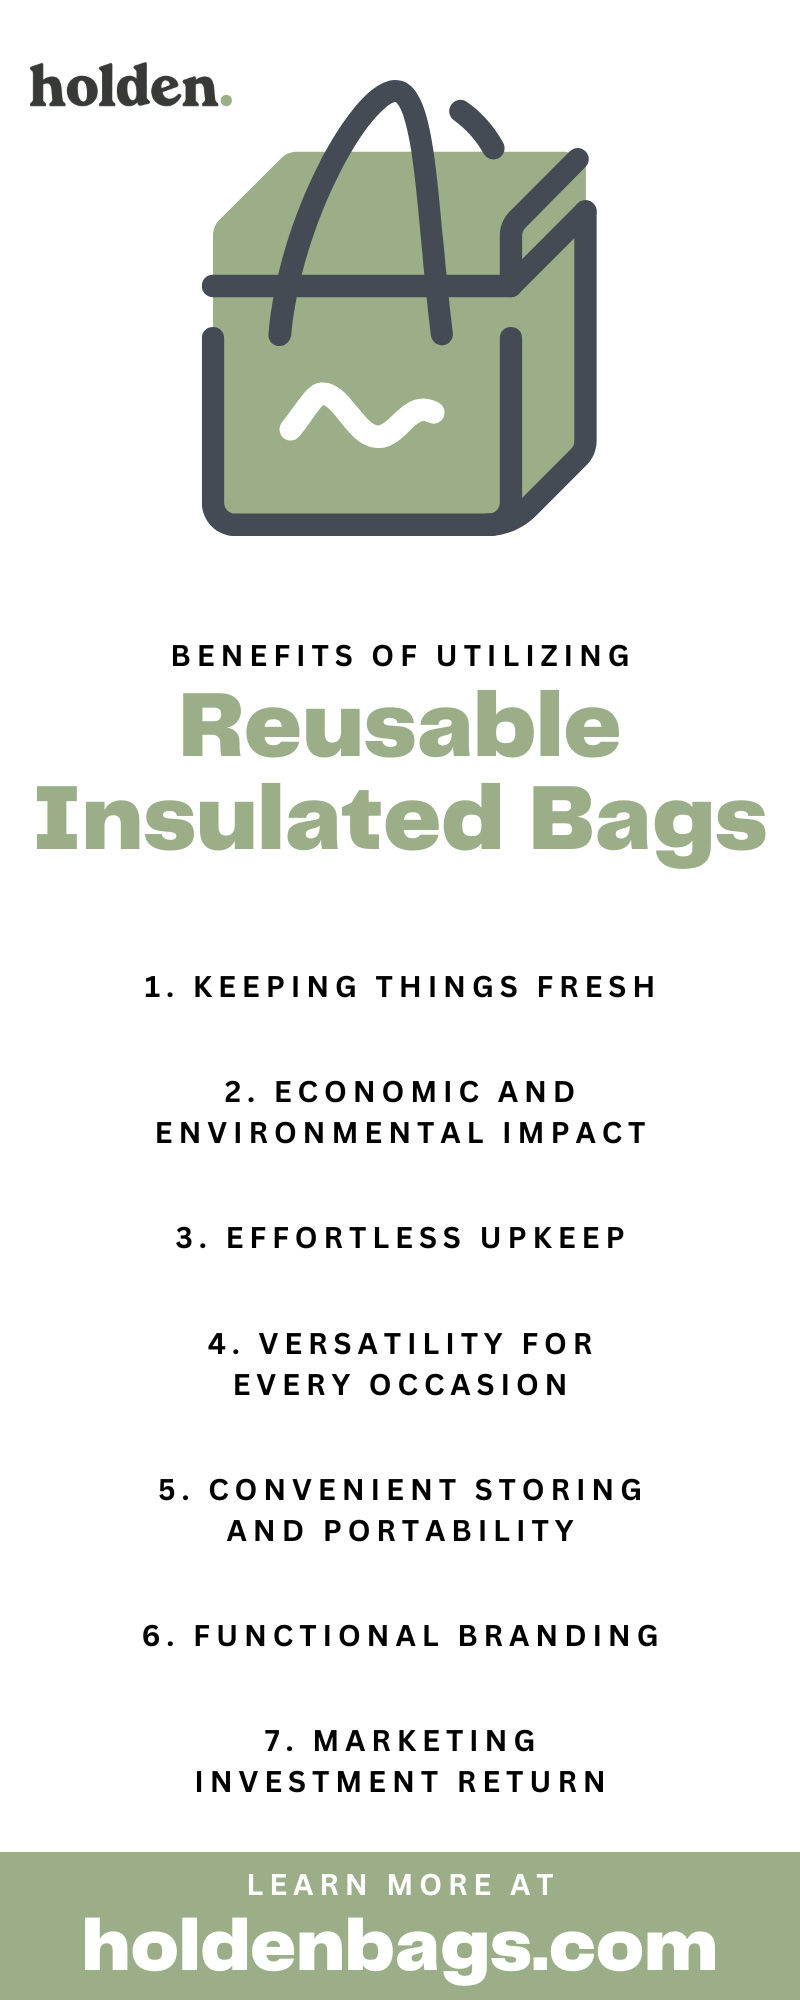 10 Benefits of Utilizing Reusable Insulated Bags